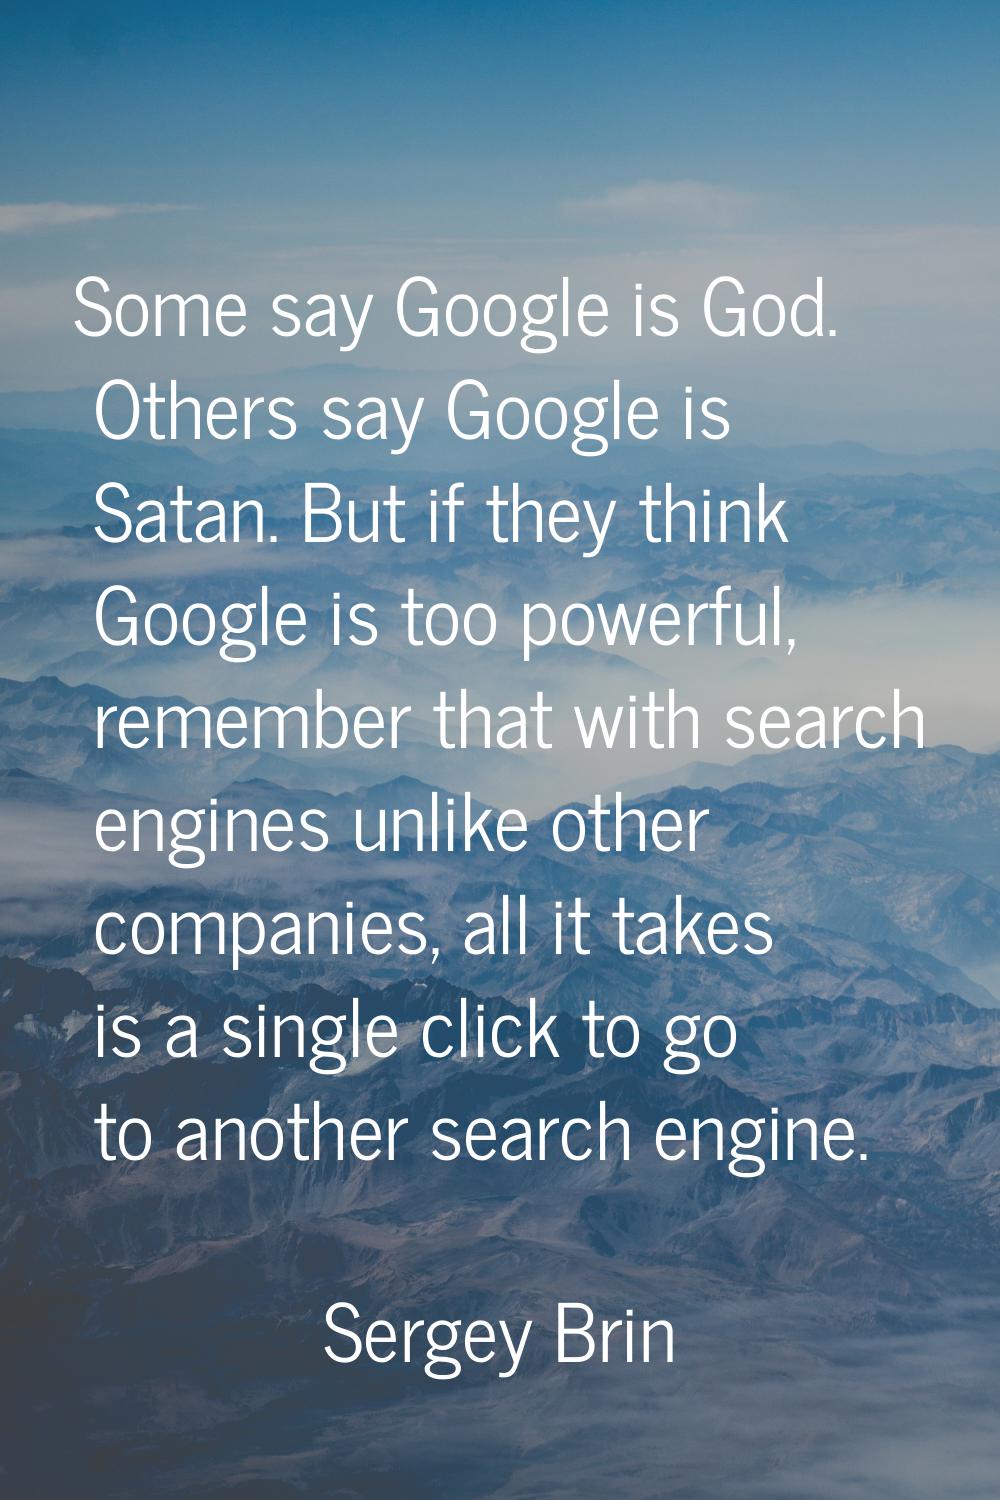 Some say Google is God. Others say Google is Satan. But if they think Google is too powerful, remem